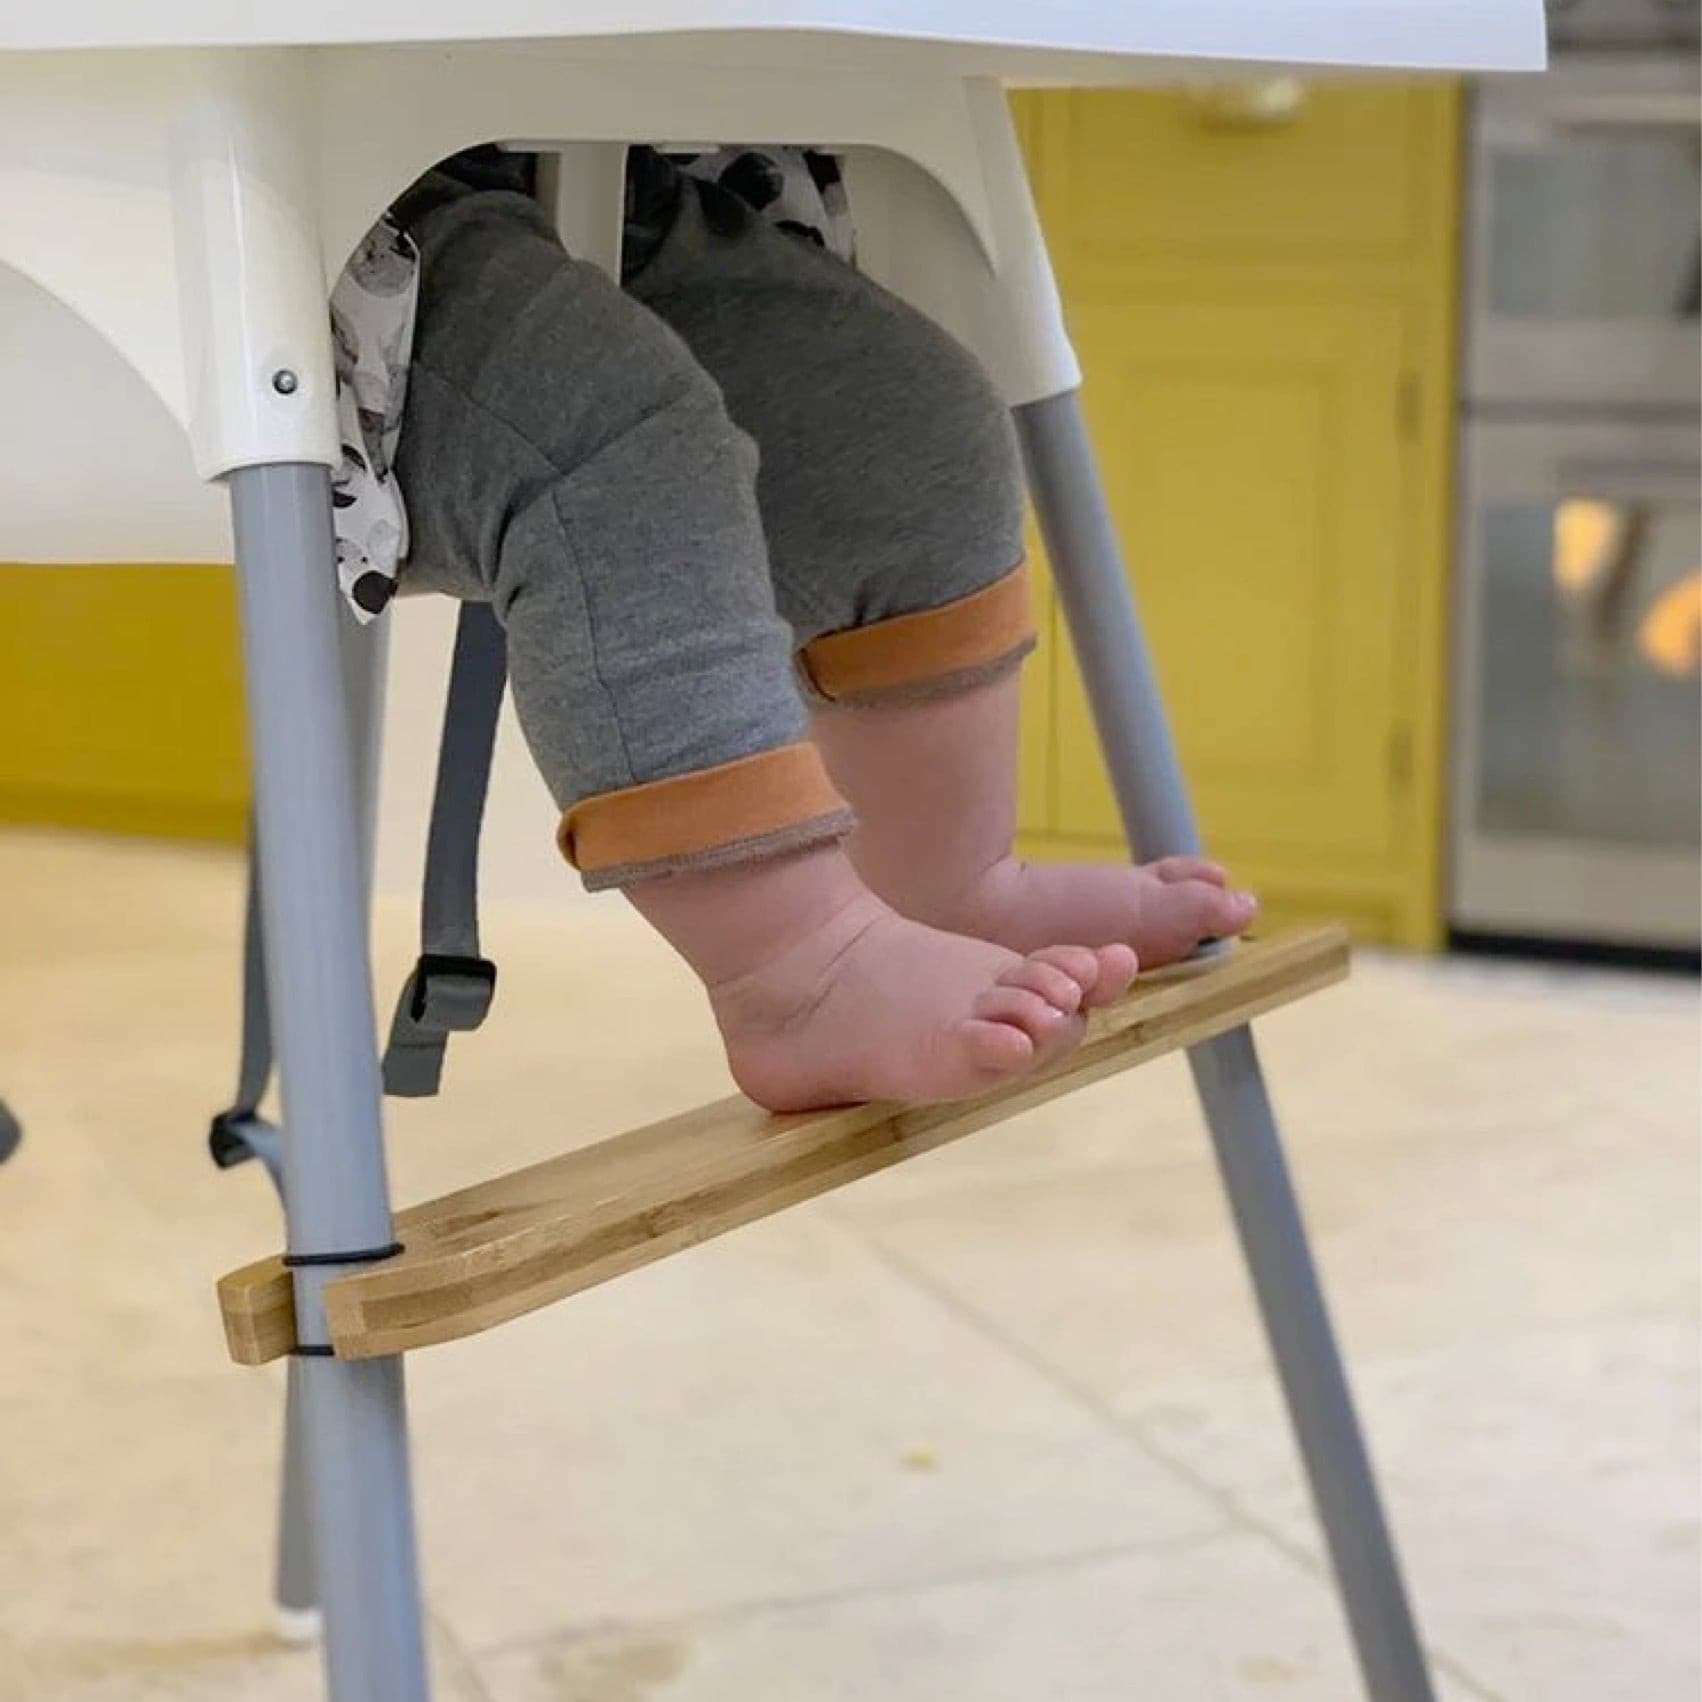 IKEA High Chair Foot Rest - Wood, Perfect for weaning